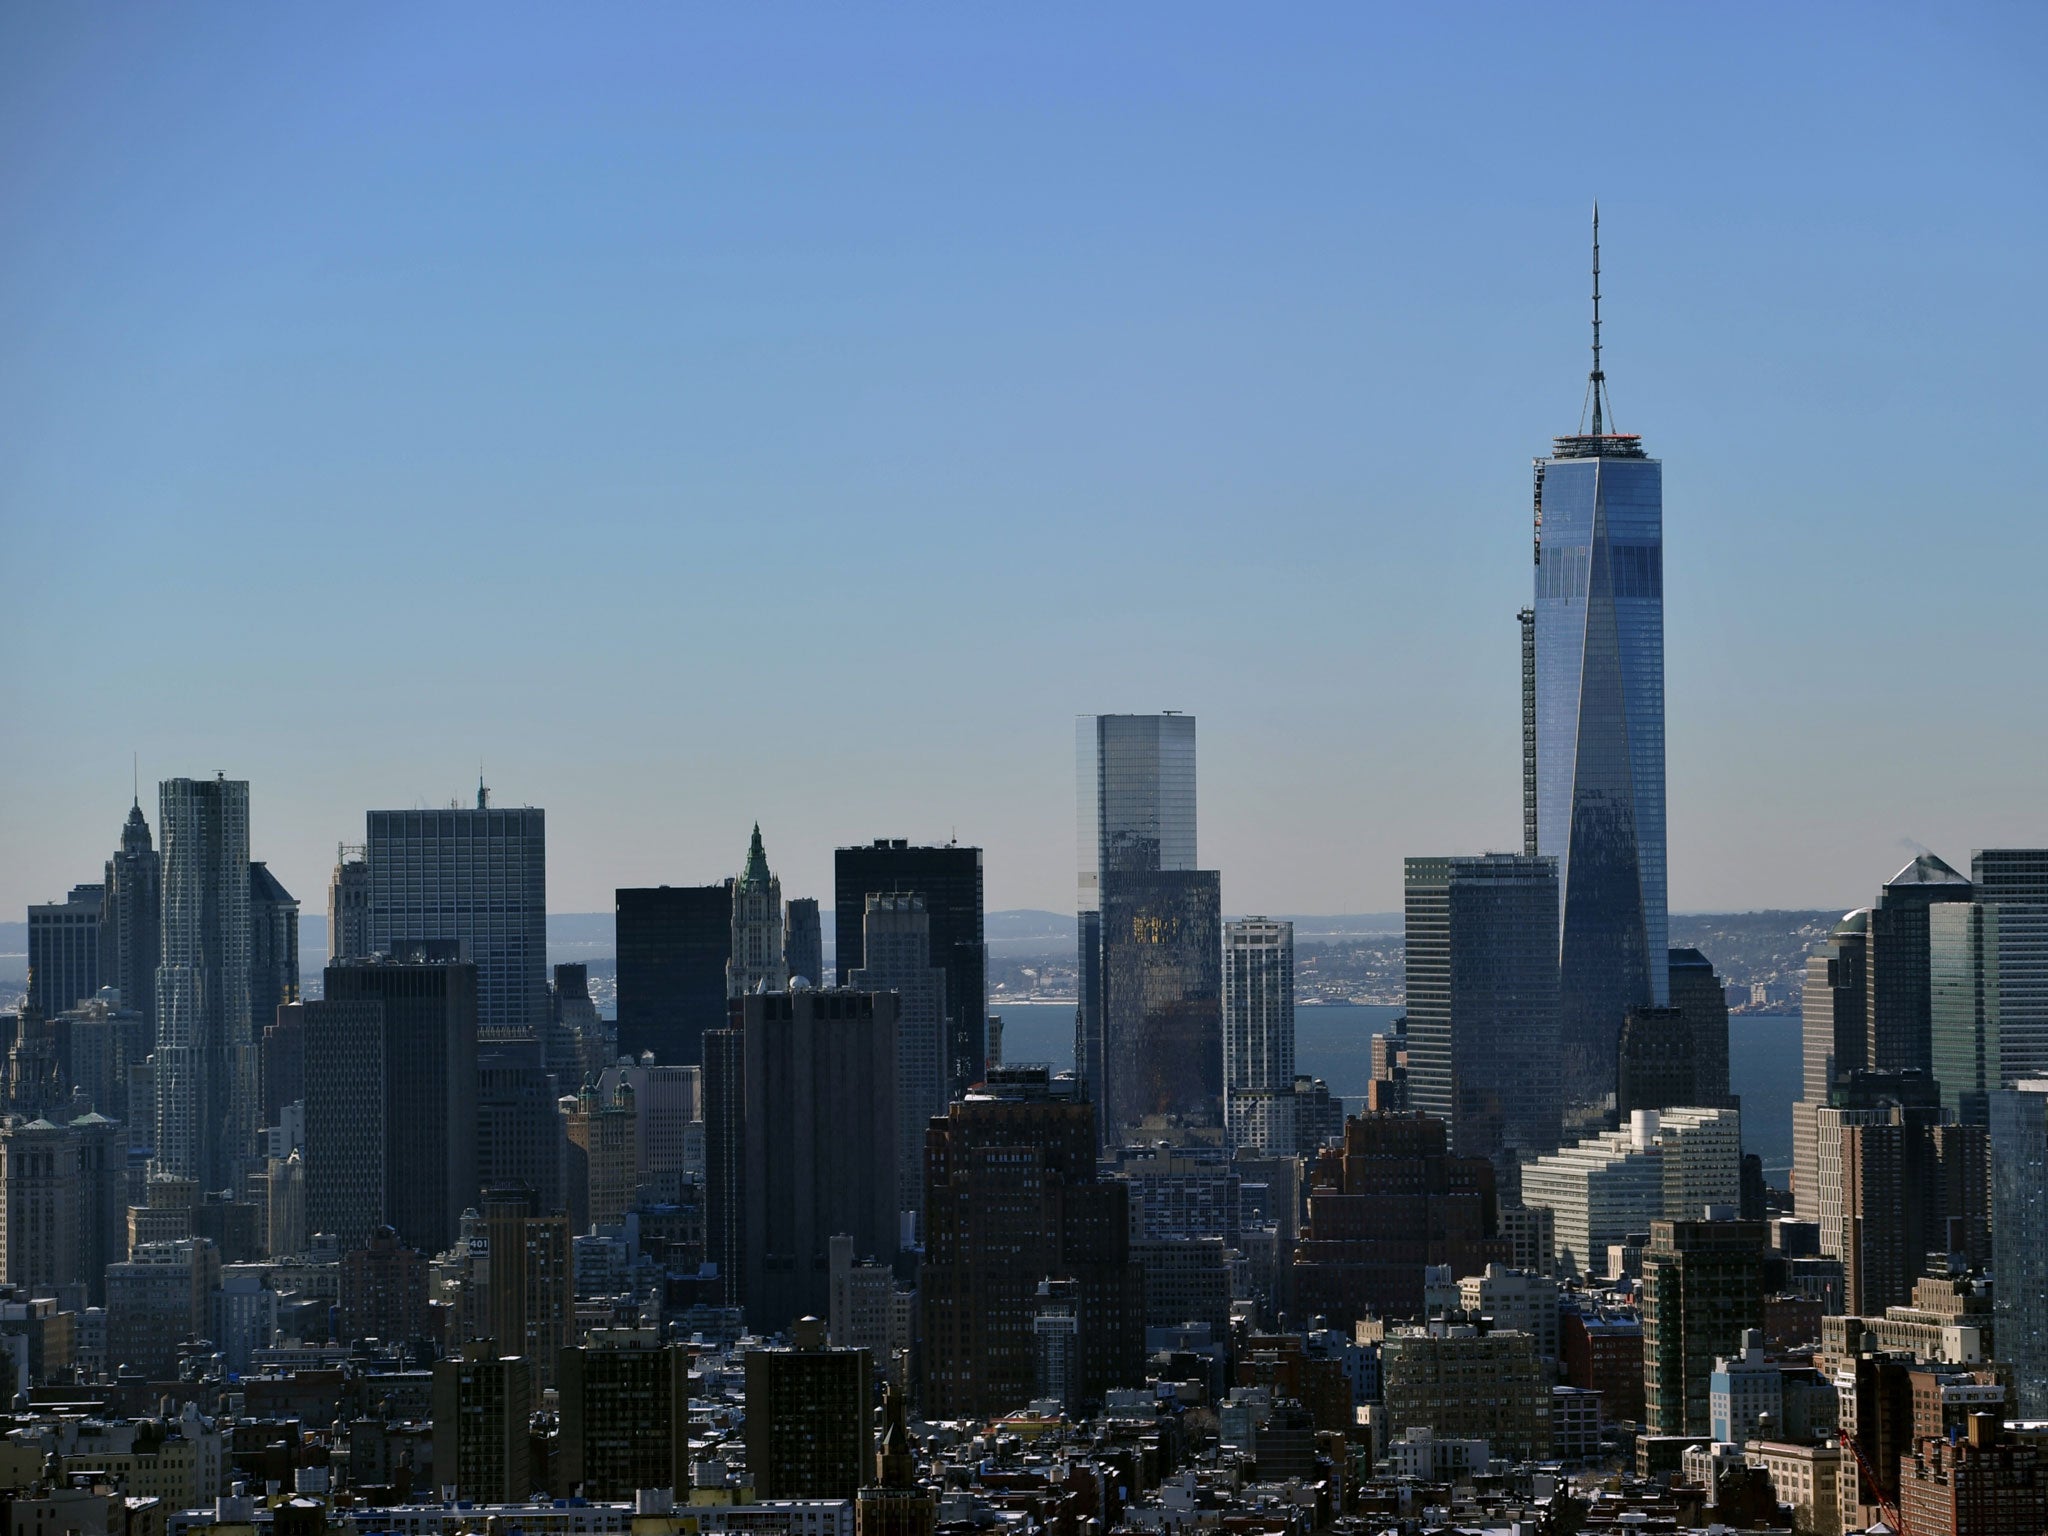 The skyline of New York, the city where Polly McCourt gave birth to her baby on the street